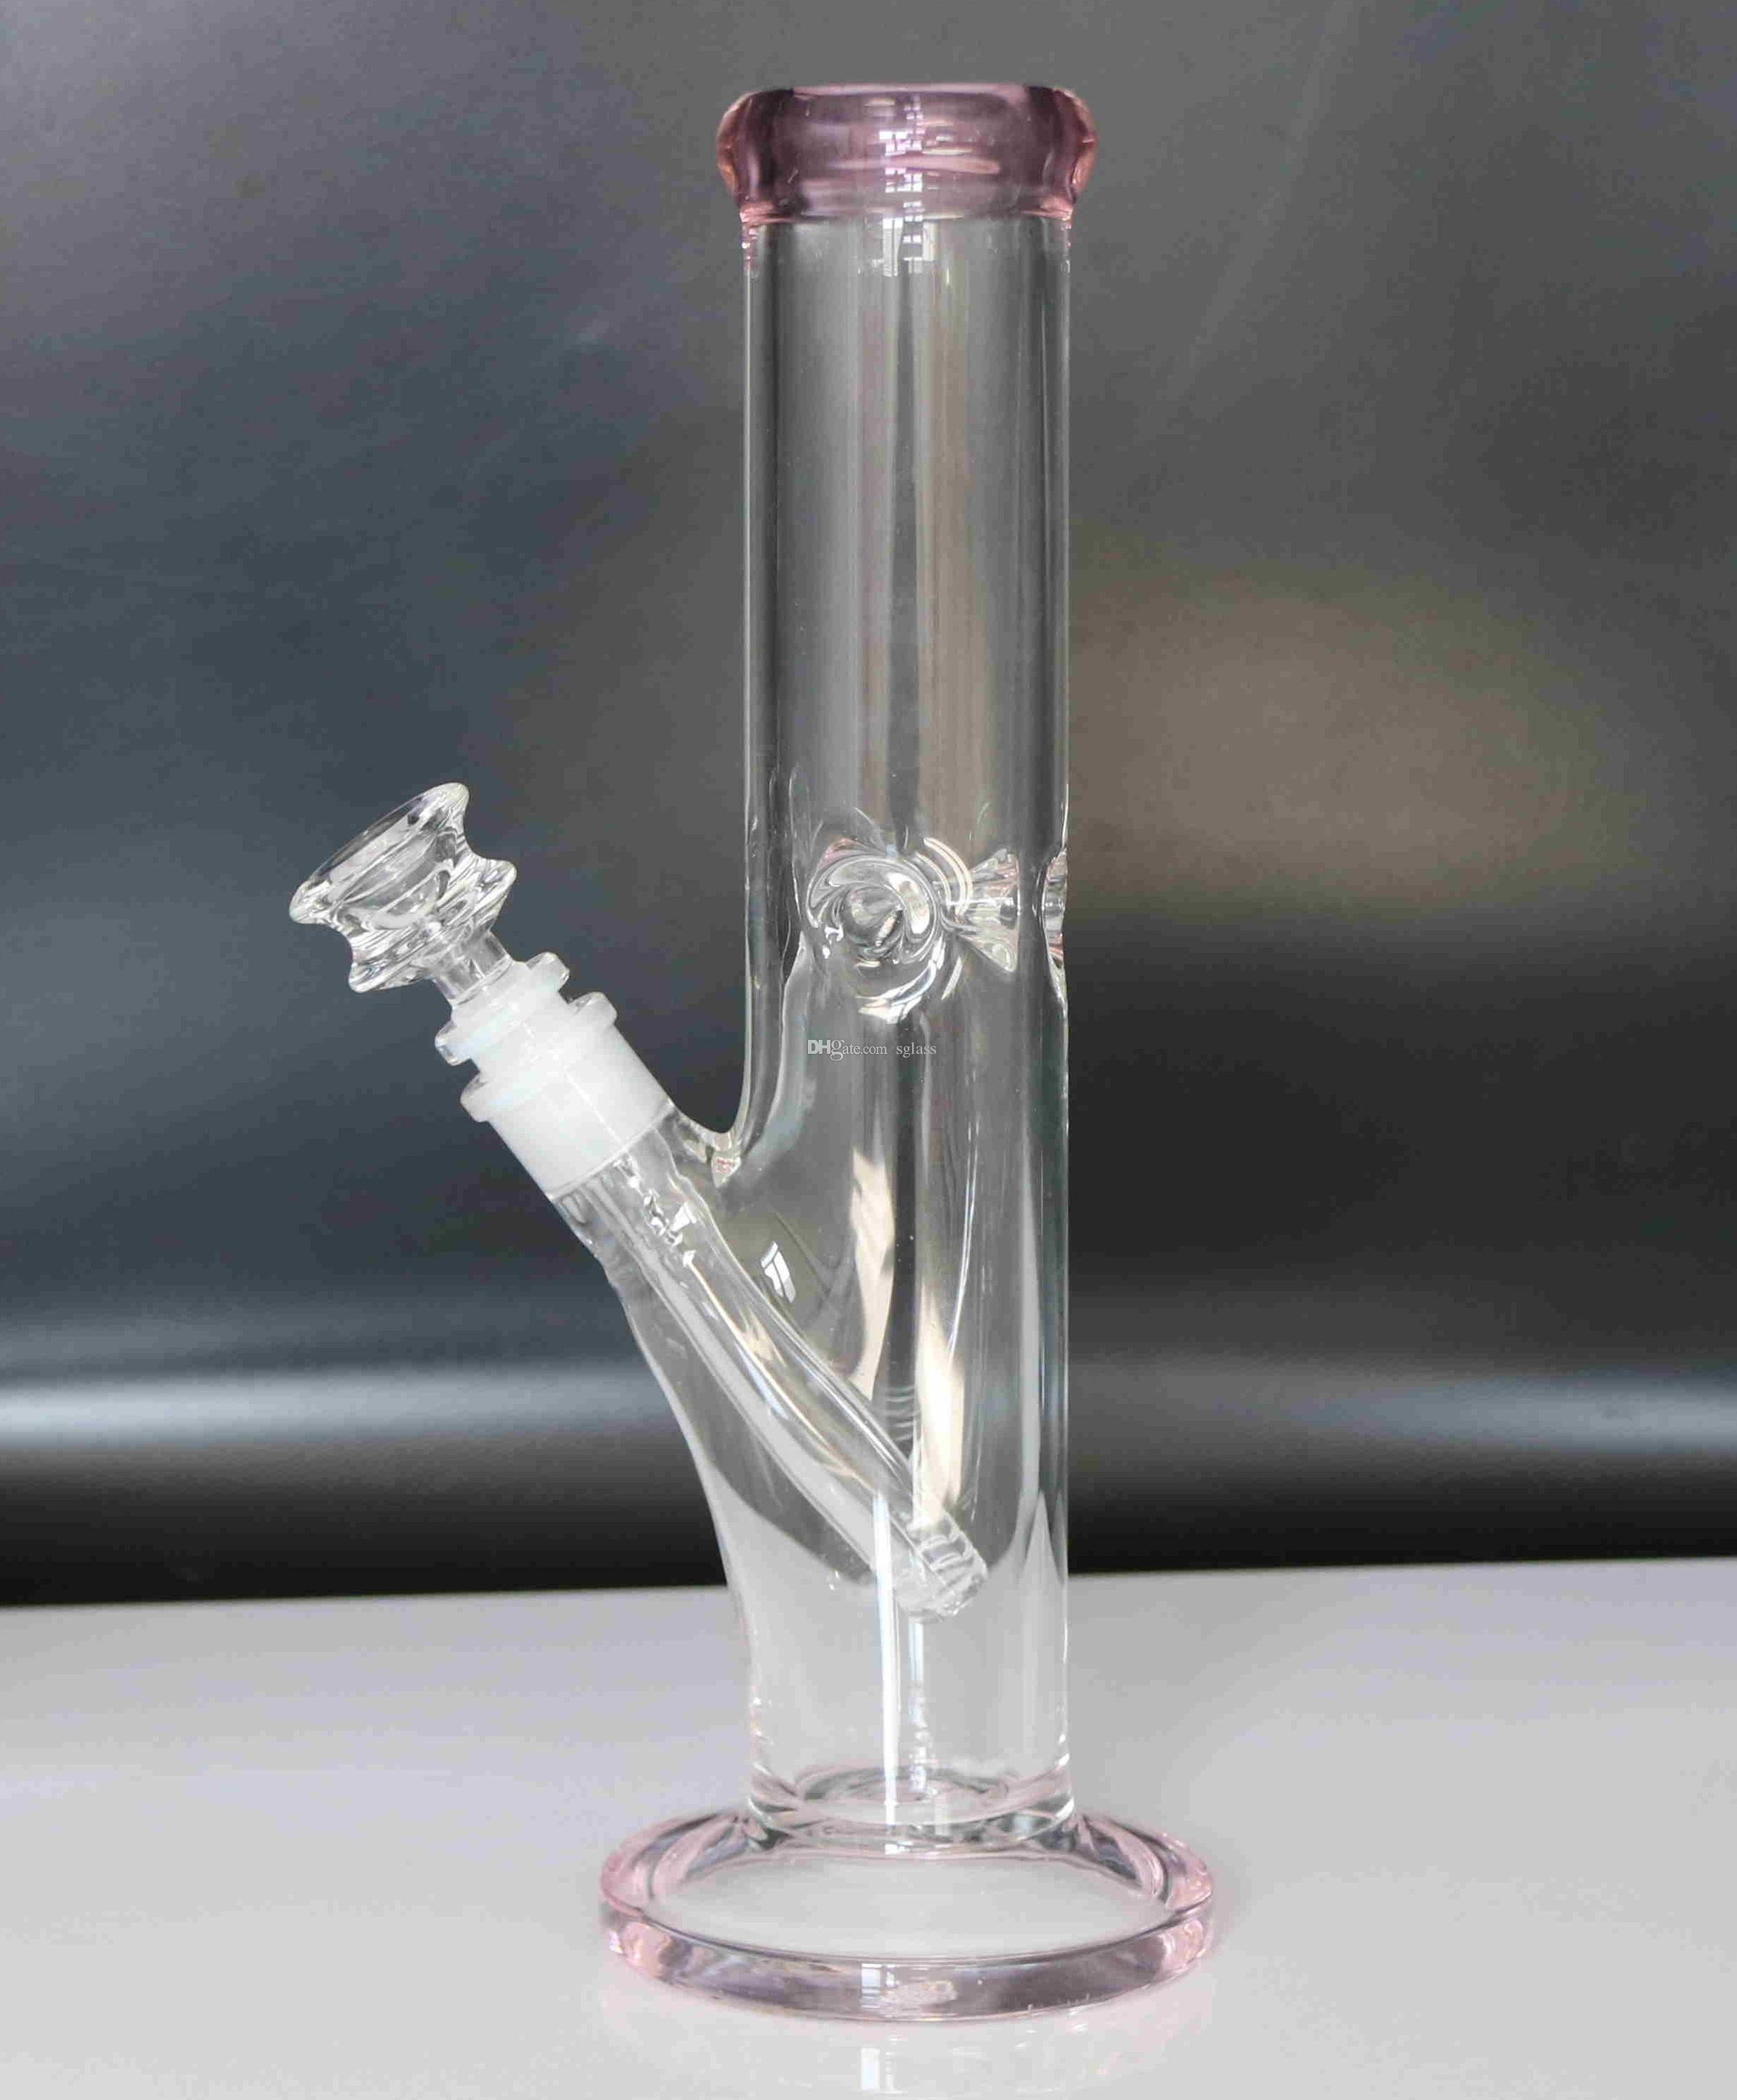 18 inch cylinder vases wholesale of 2018 7 mm thick glass bong 12 inch 18 mm joint thick and heacy intended for 2018 7 mm thick glass bong 12 inch 18 mm joint thick and heacy glass bong foam packing with carton gift box cylinder design and mix color